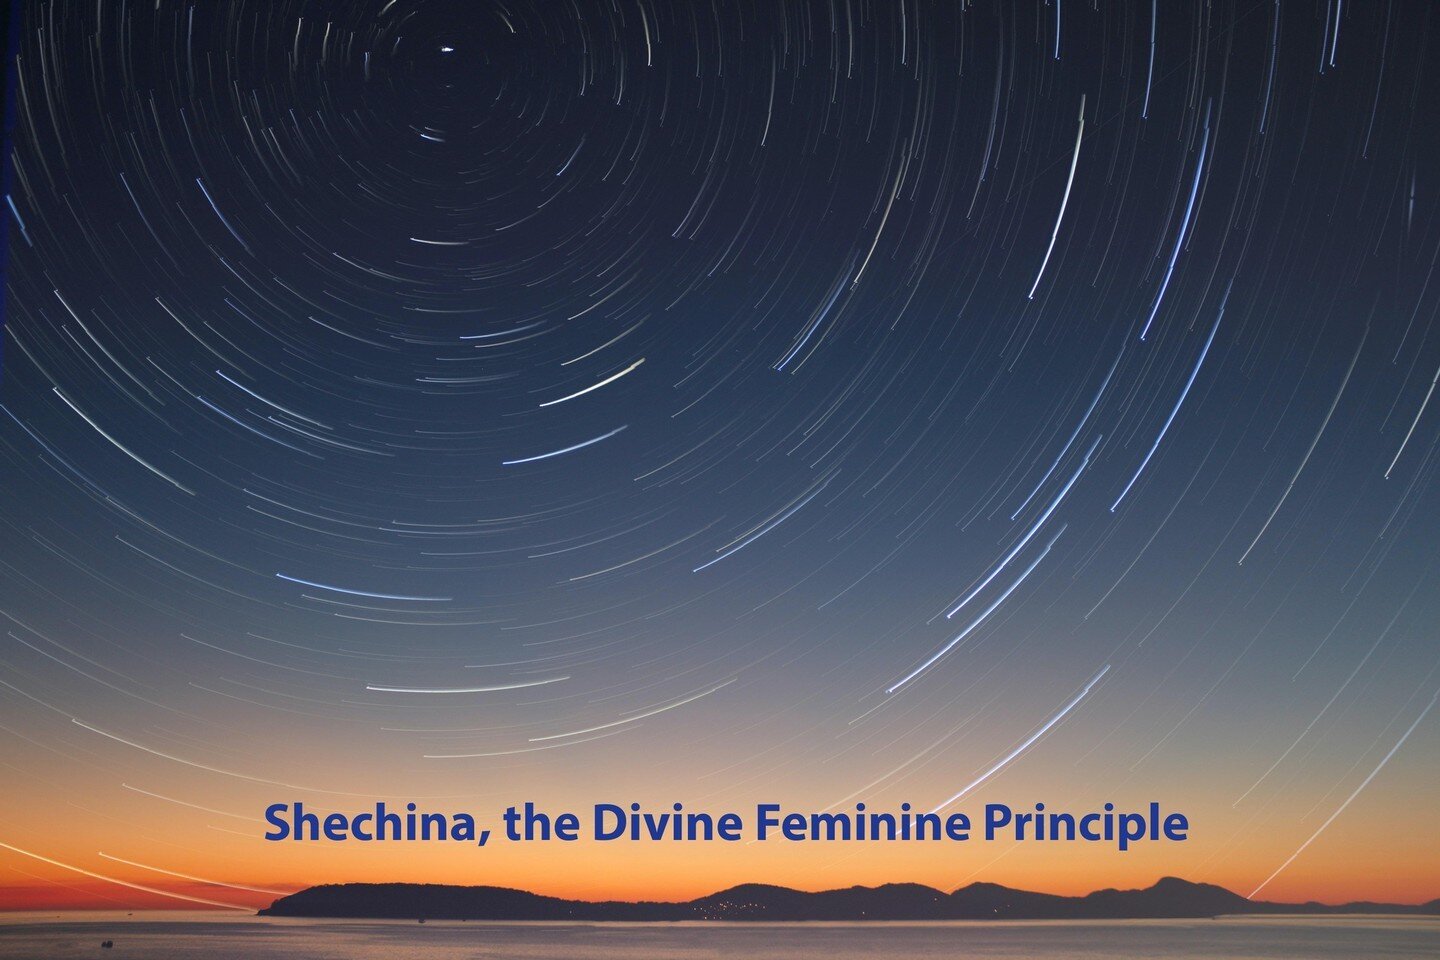 Did you know that according to Kabbalistic thought the blueprint of Creation includes the Shechina, the divine feminine principle, eventually leading the way for the redemption of the world ?⁠
⁠
⁠
#BodySoulSynergetics⁠
#MauiRabbi⁠
#JewishSpirituality